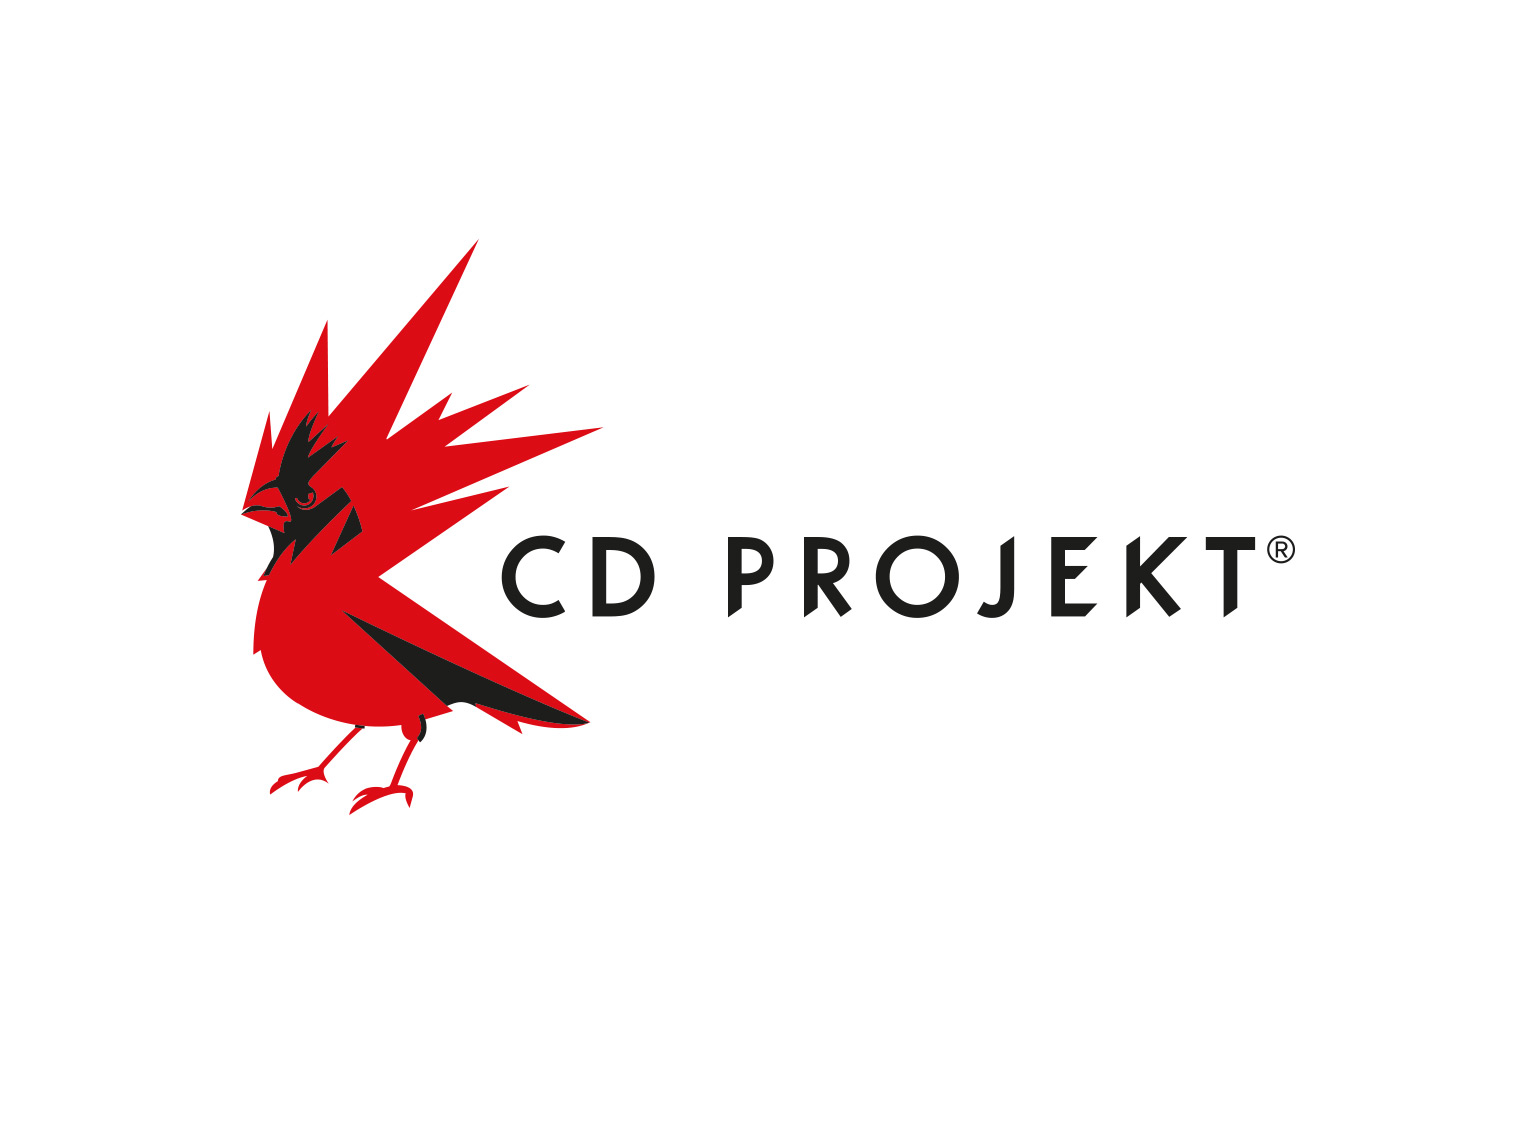 CD project